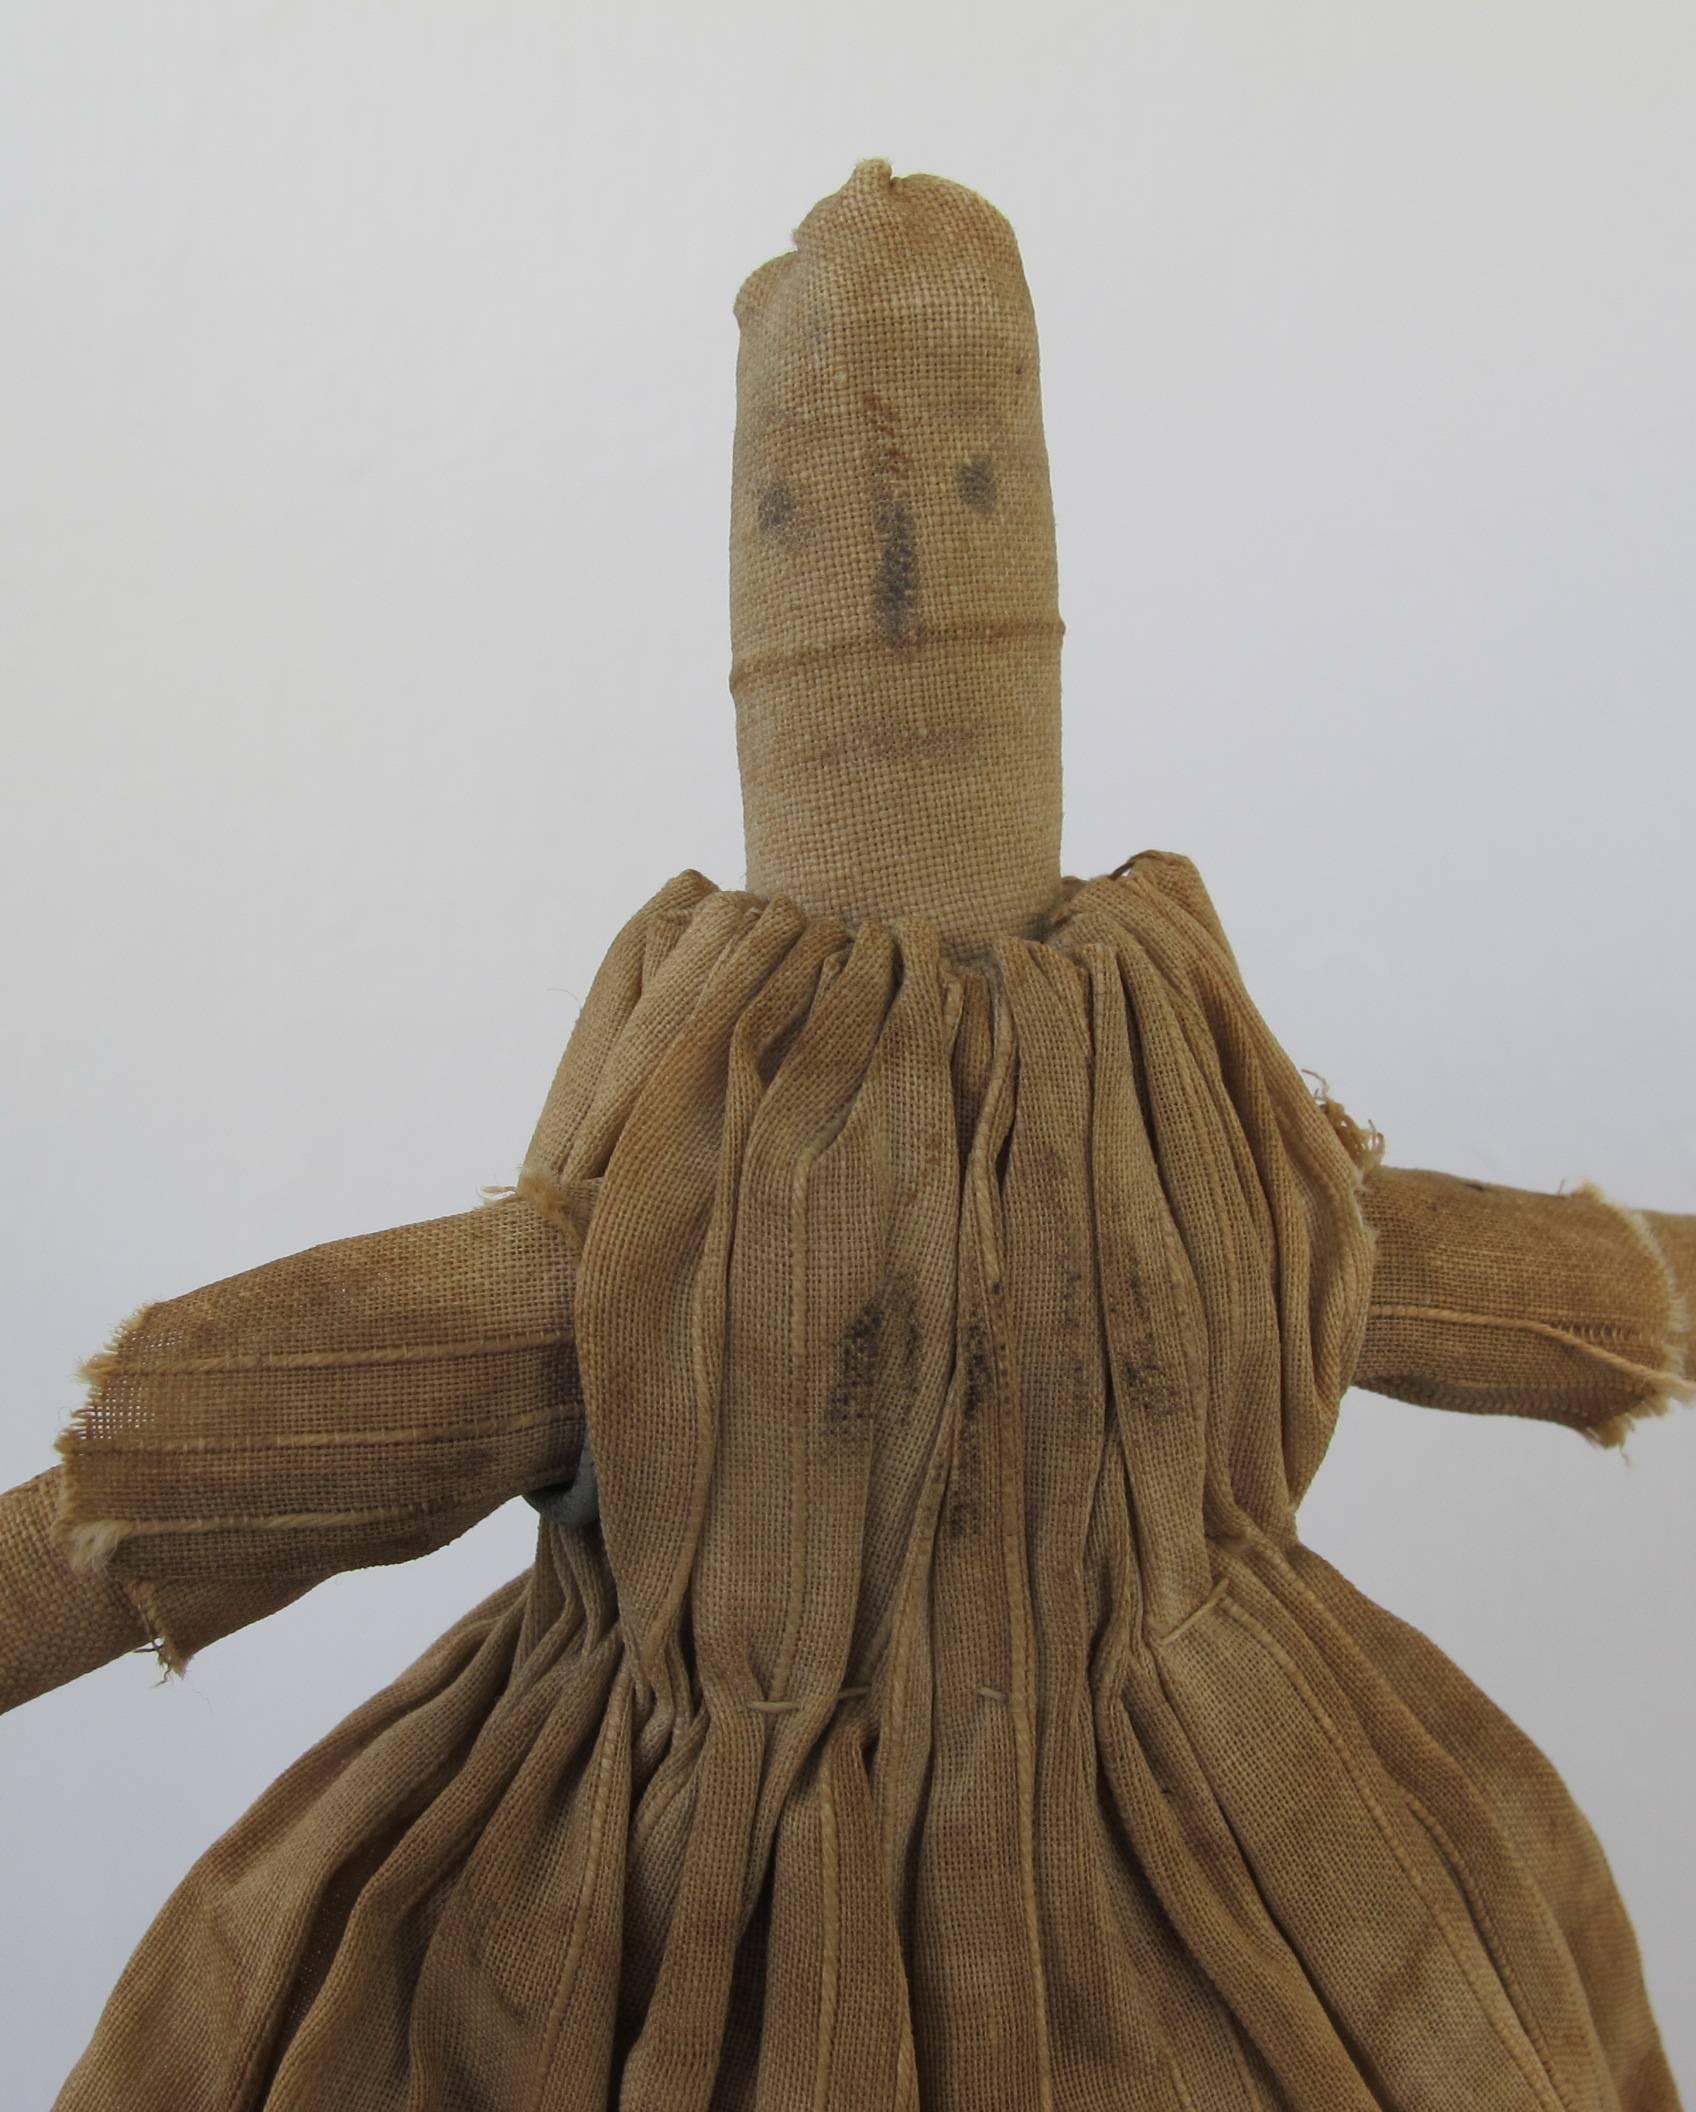 Simple cloth doll of homespun linen with rolled arms and legs and head. The gathered dress was once blue and is now a mottled tan. Pictured in American Folk Dolls by Wendy Lavitt - full page. Mounted on American Primitive metal base.